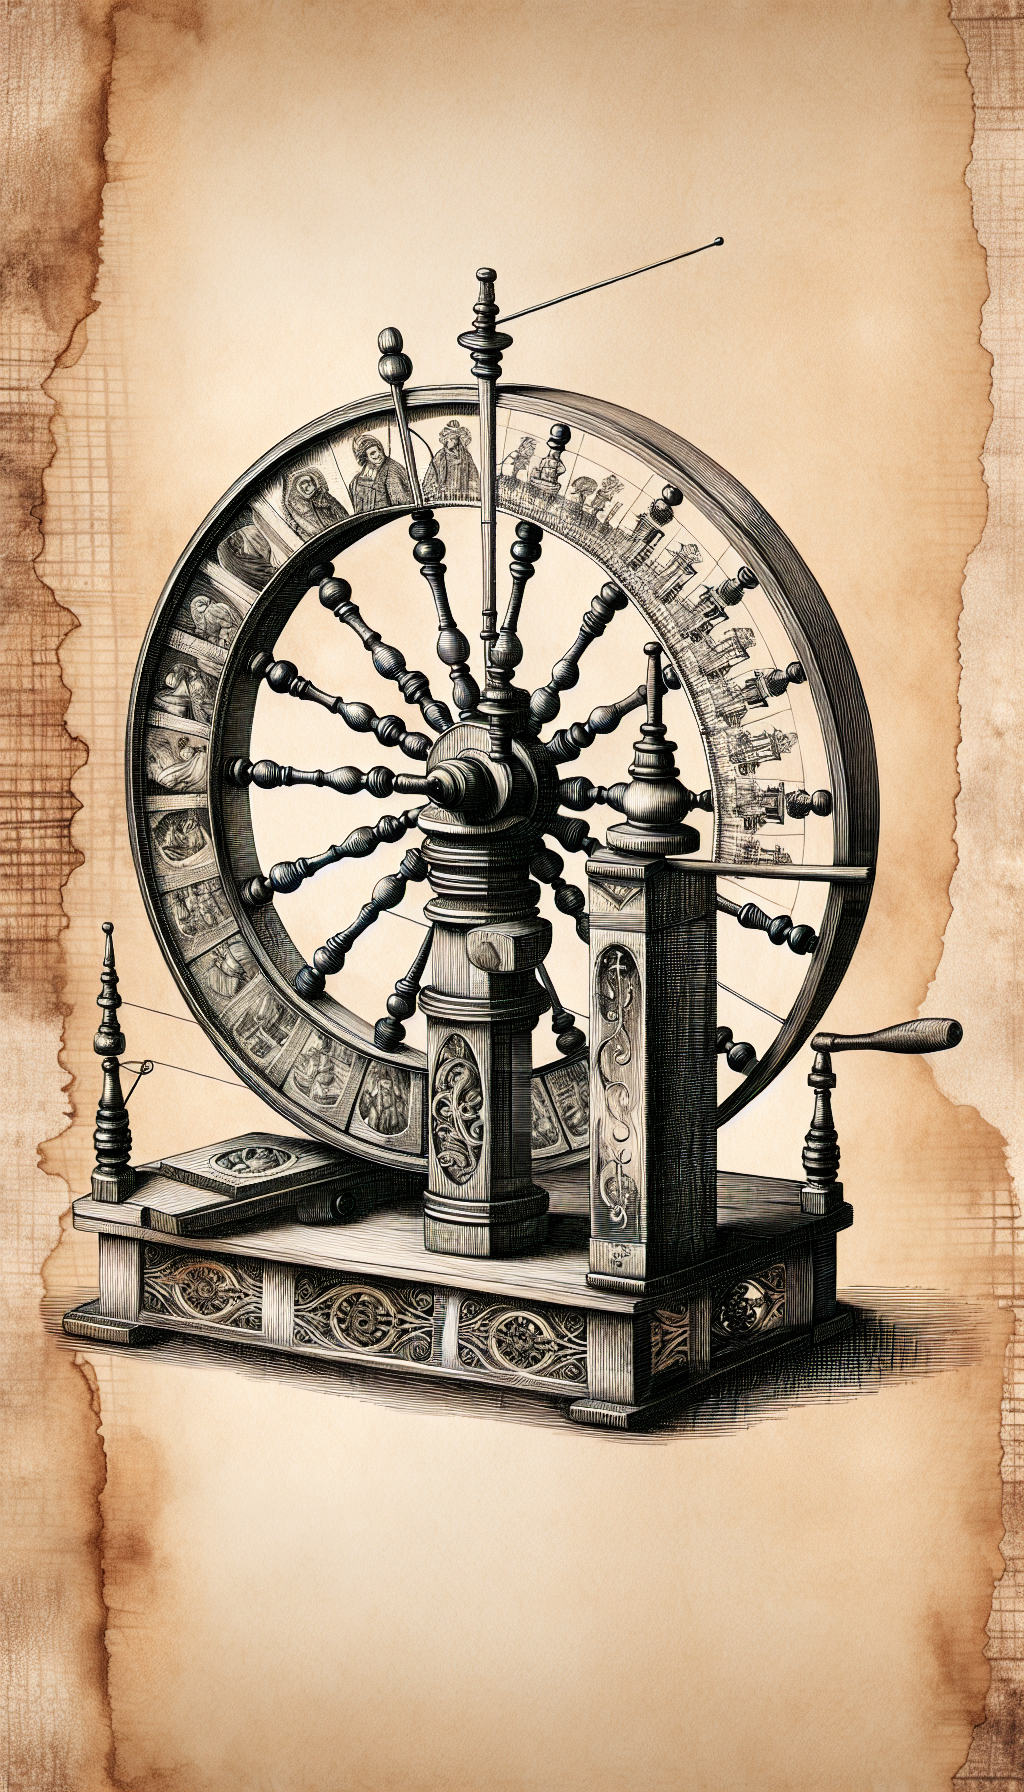 An intricately detailed ink sketch depicts a half-designed antique spinning wheel, the incomplete side revealing a ghostly overlay of ancient textile craftsmen at work. Each spindle bears inscribed symbols unique to different historical eras, aiding in the identification of the wheel's provenance, with a textured backdrop mimicking aged parchment to enhance the timeless ambiance.